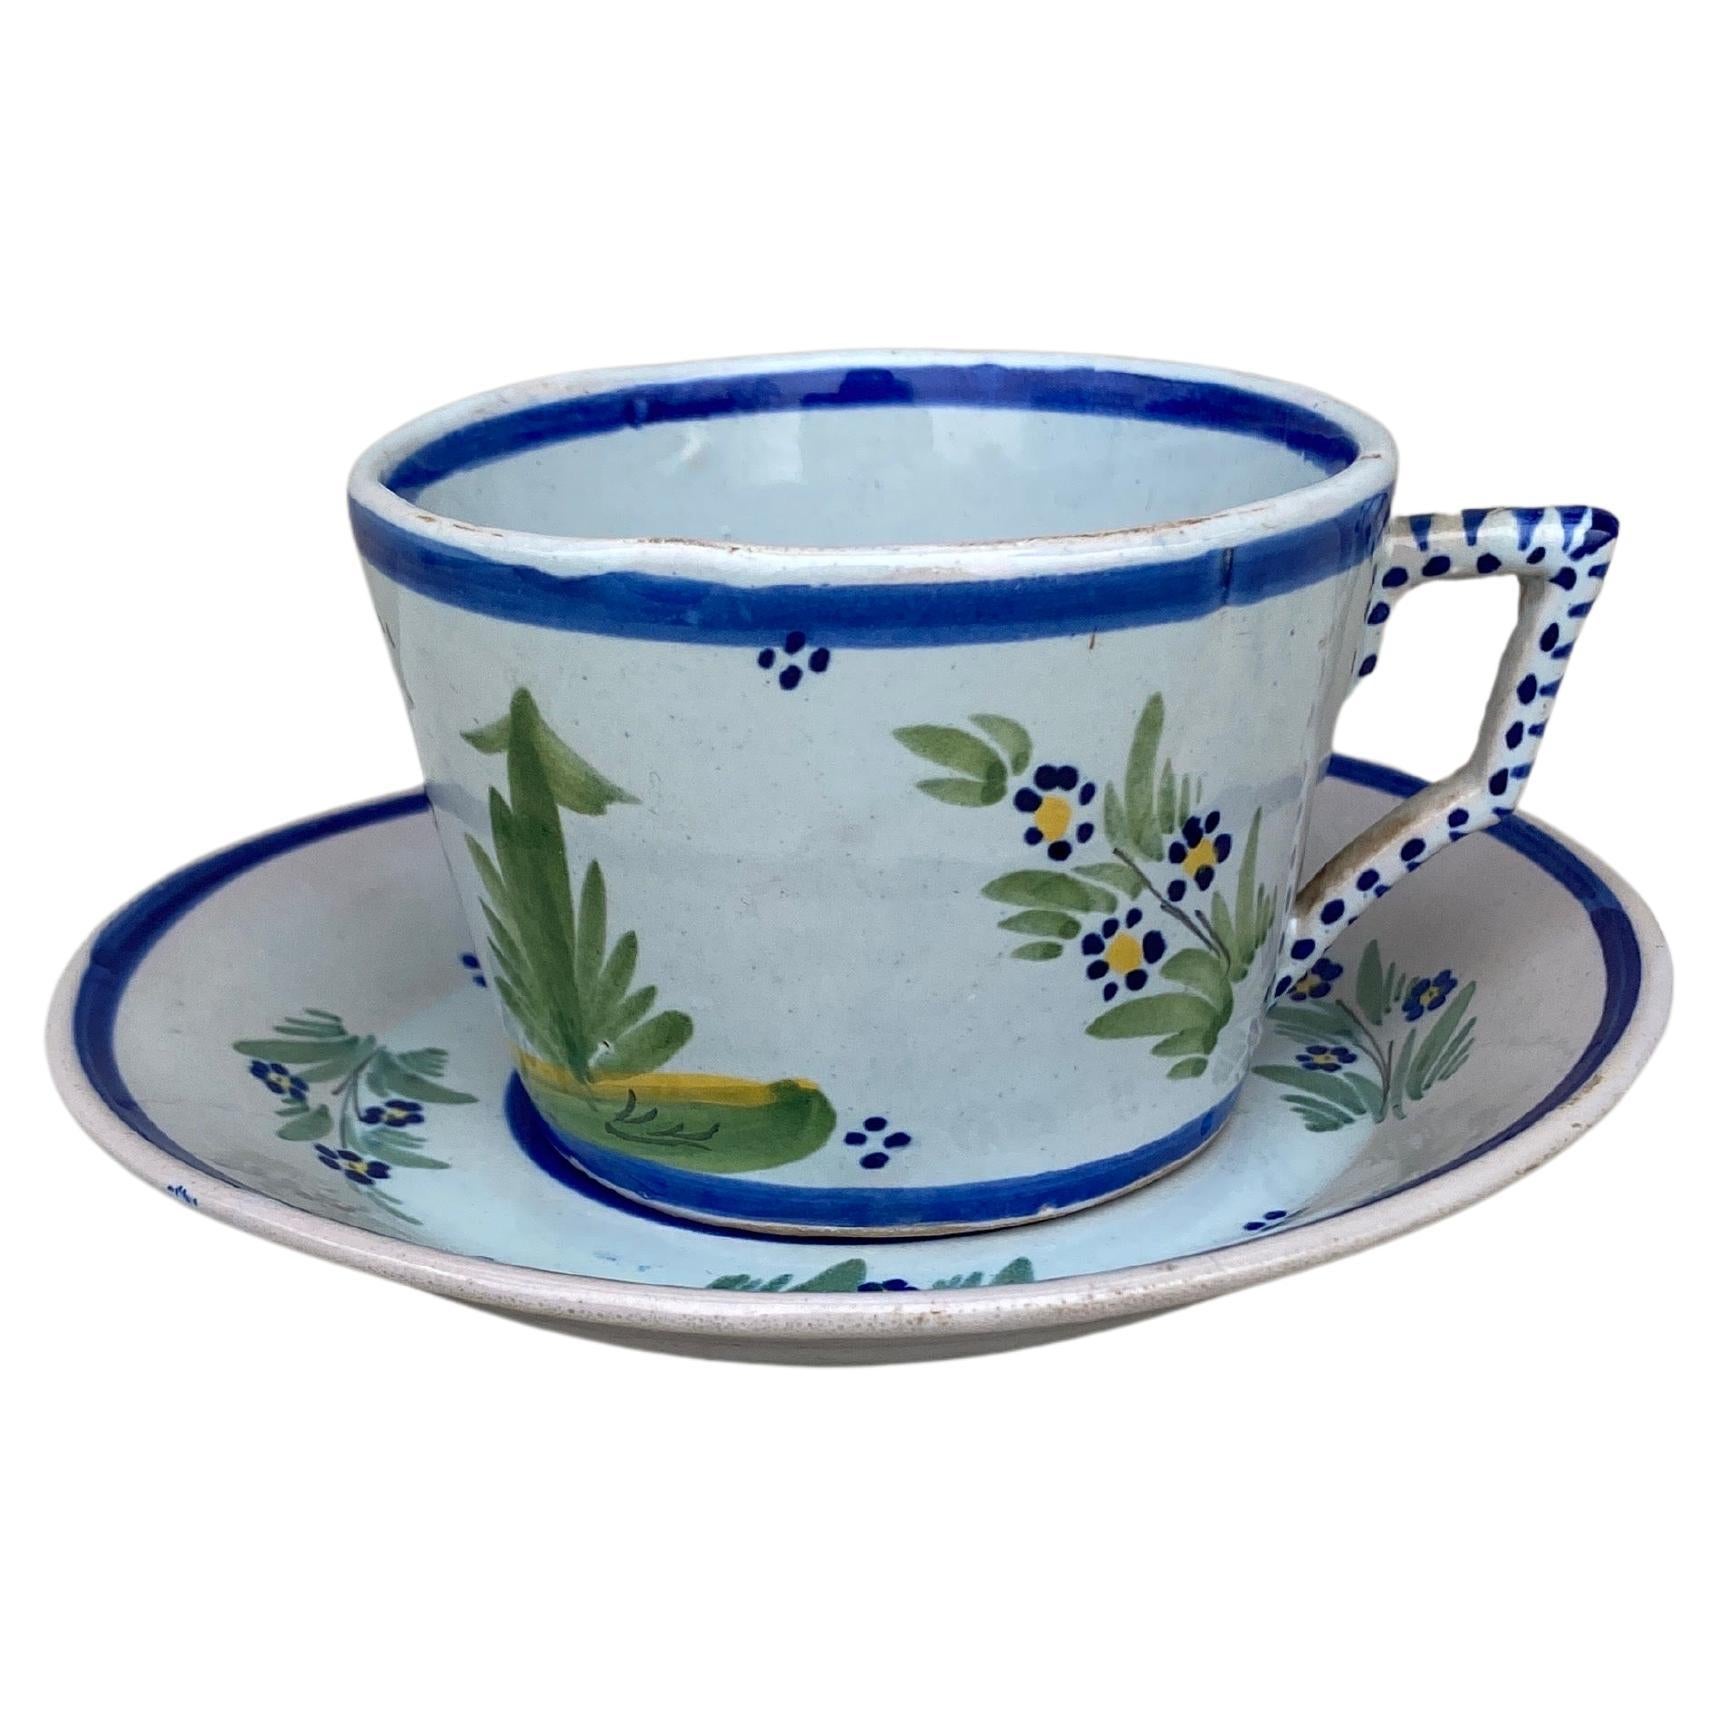 French Faience cup & saucer signed HB Quimper circa 1900.